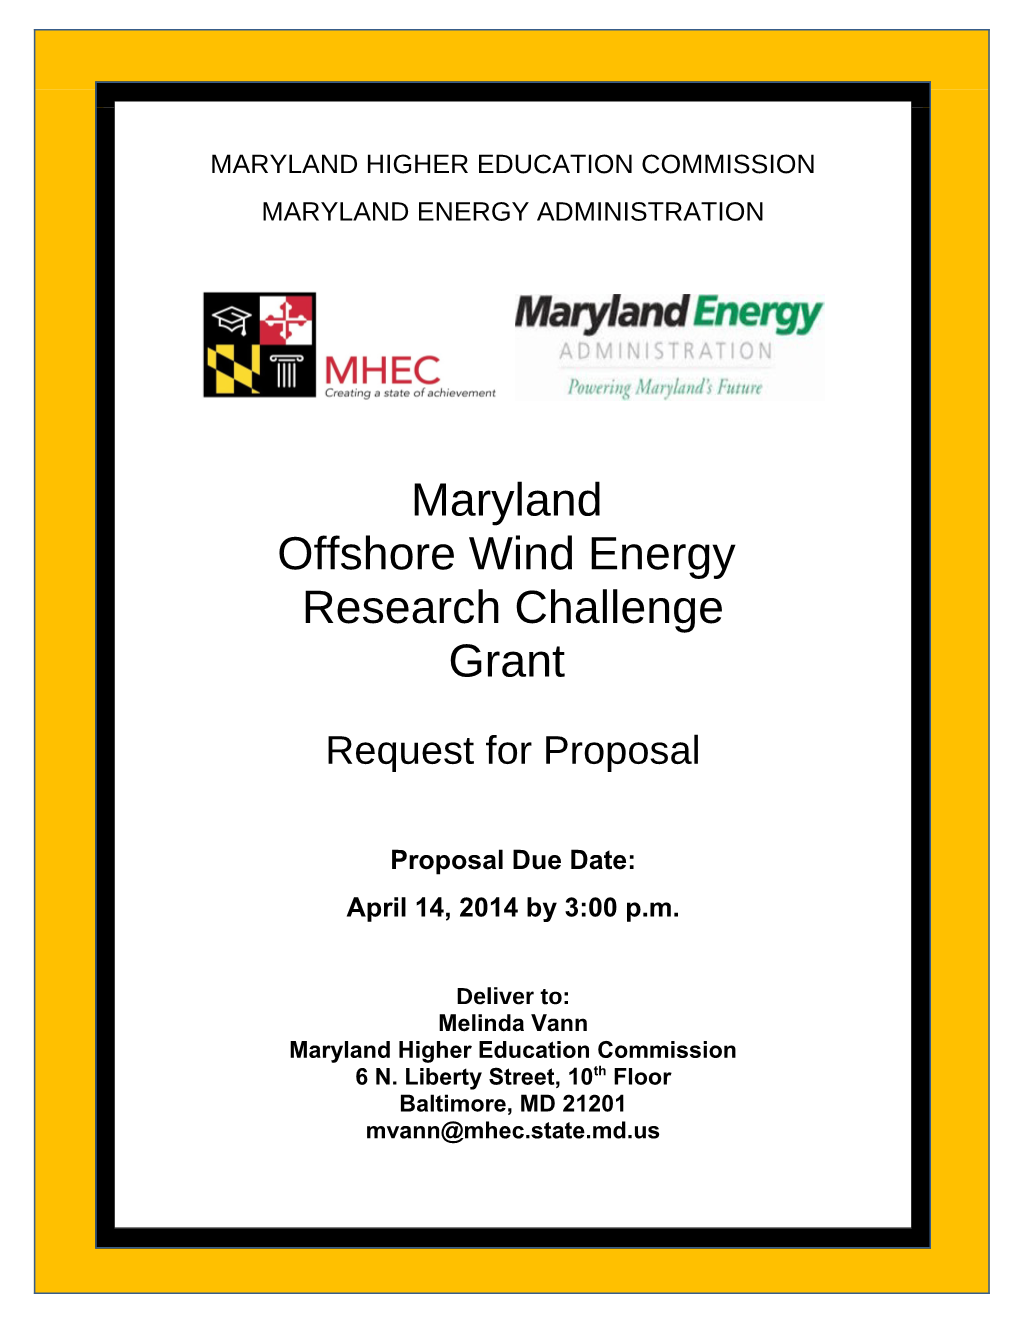 Maryland Offshore Wind Energy Research Challenge Grant Program